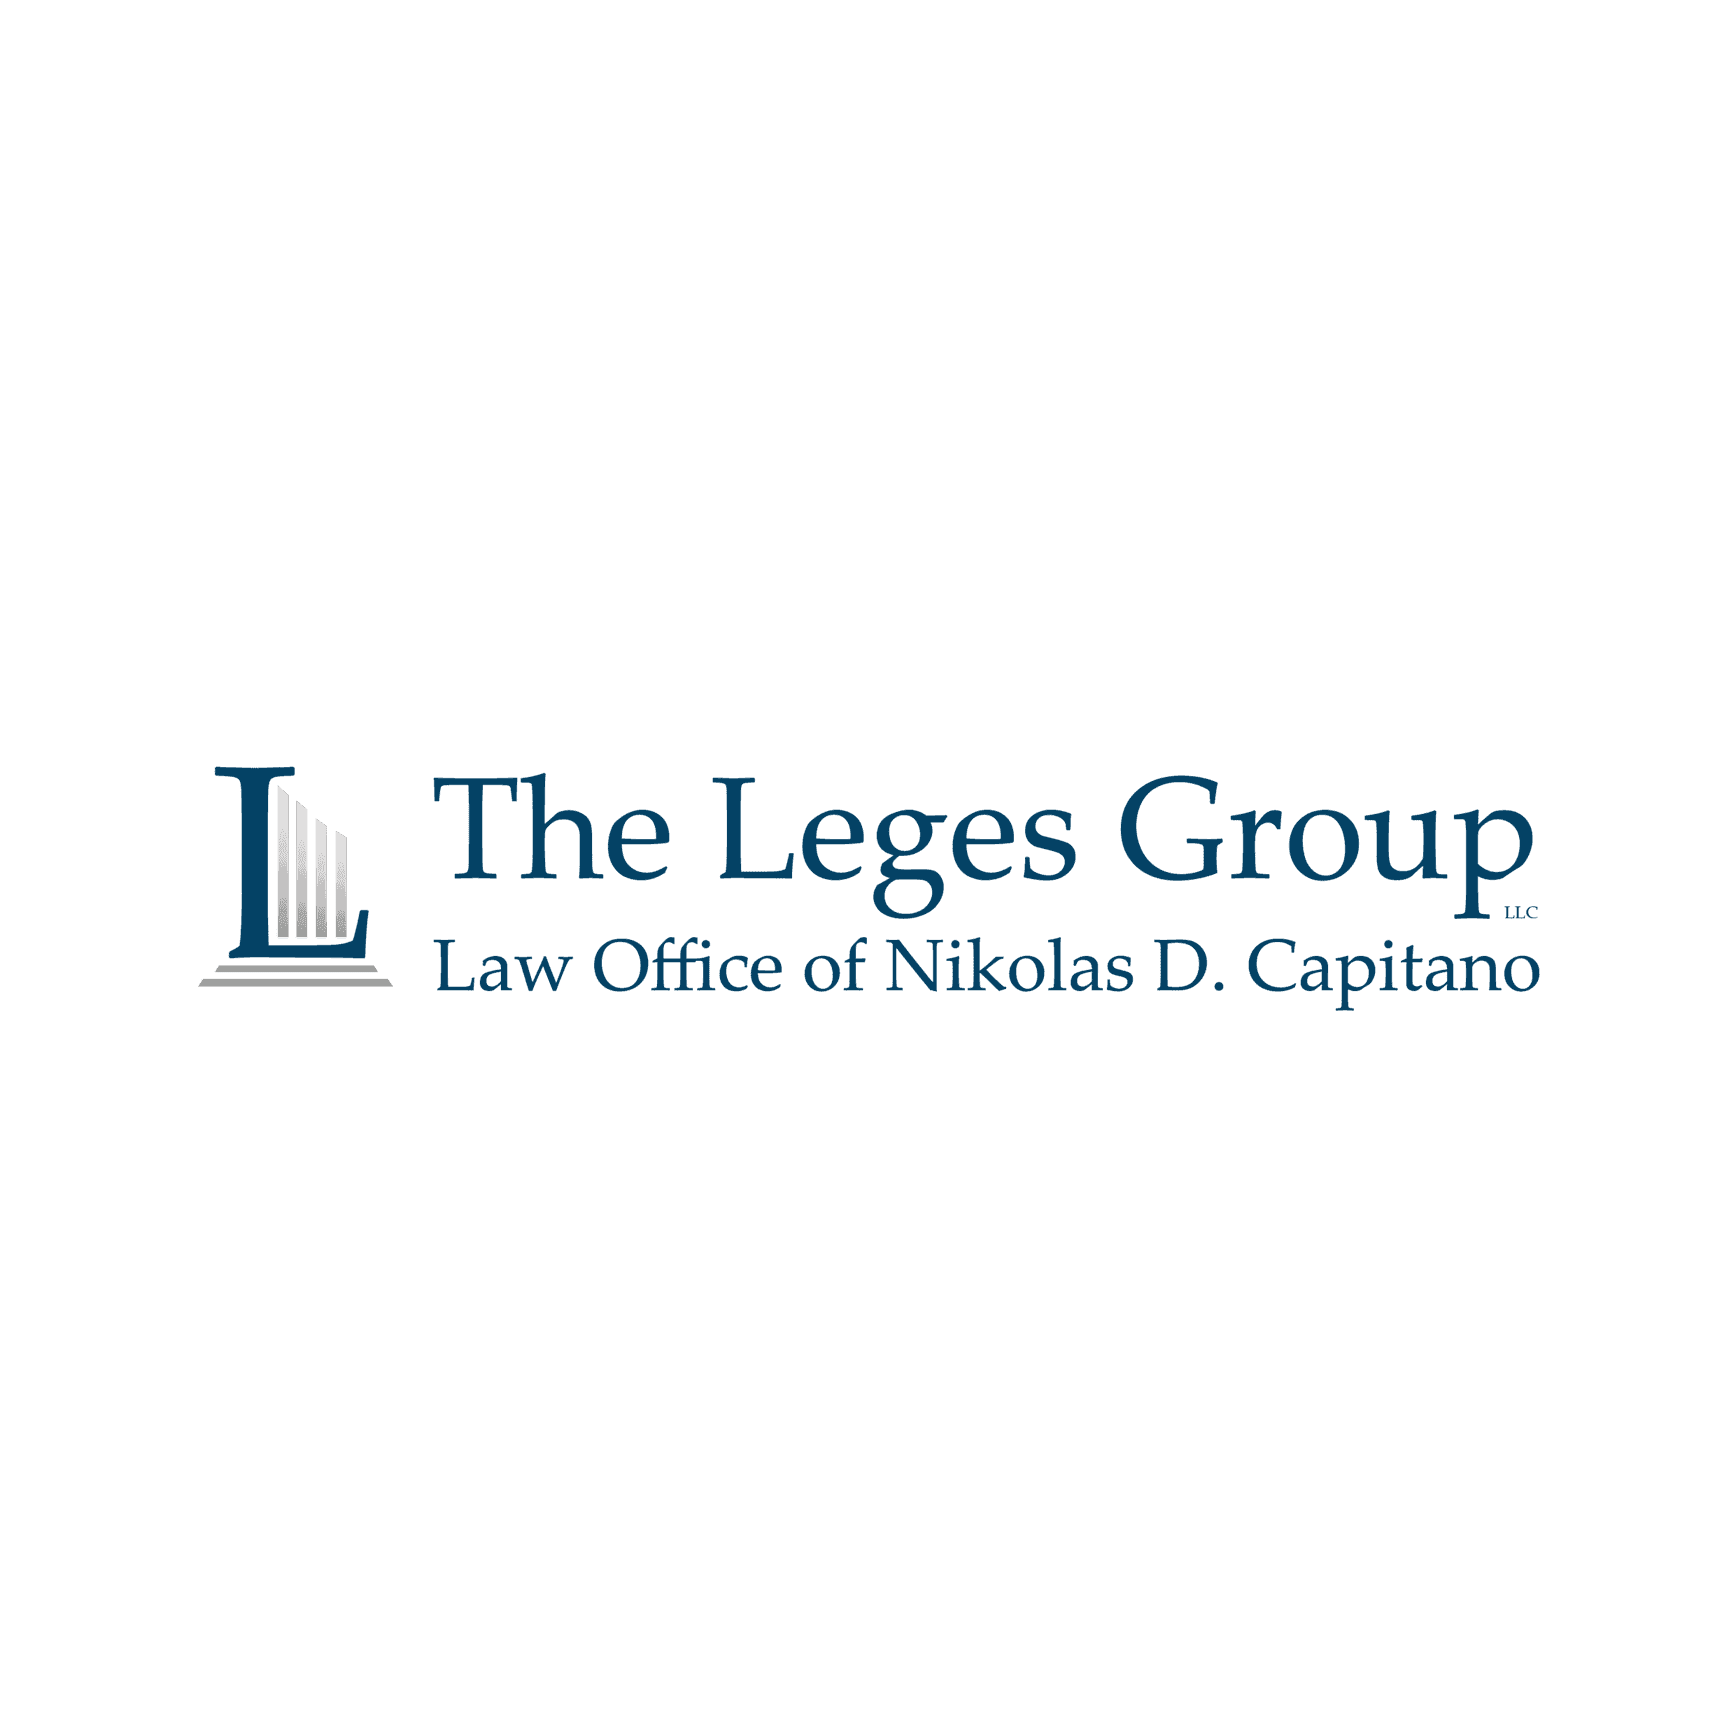 Law Office of Nikolas D. Capitano, The Leges Group LLC - Wyomissing, PA 19610 - (610)200-6665 | ShowMeLocal.com